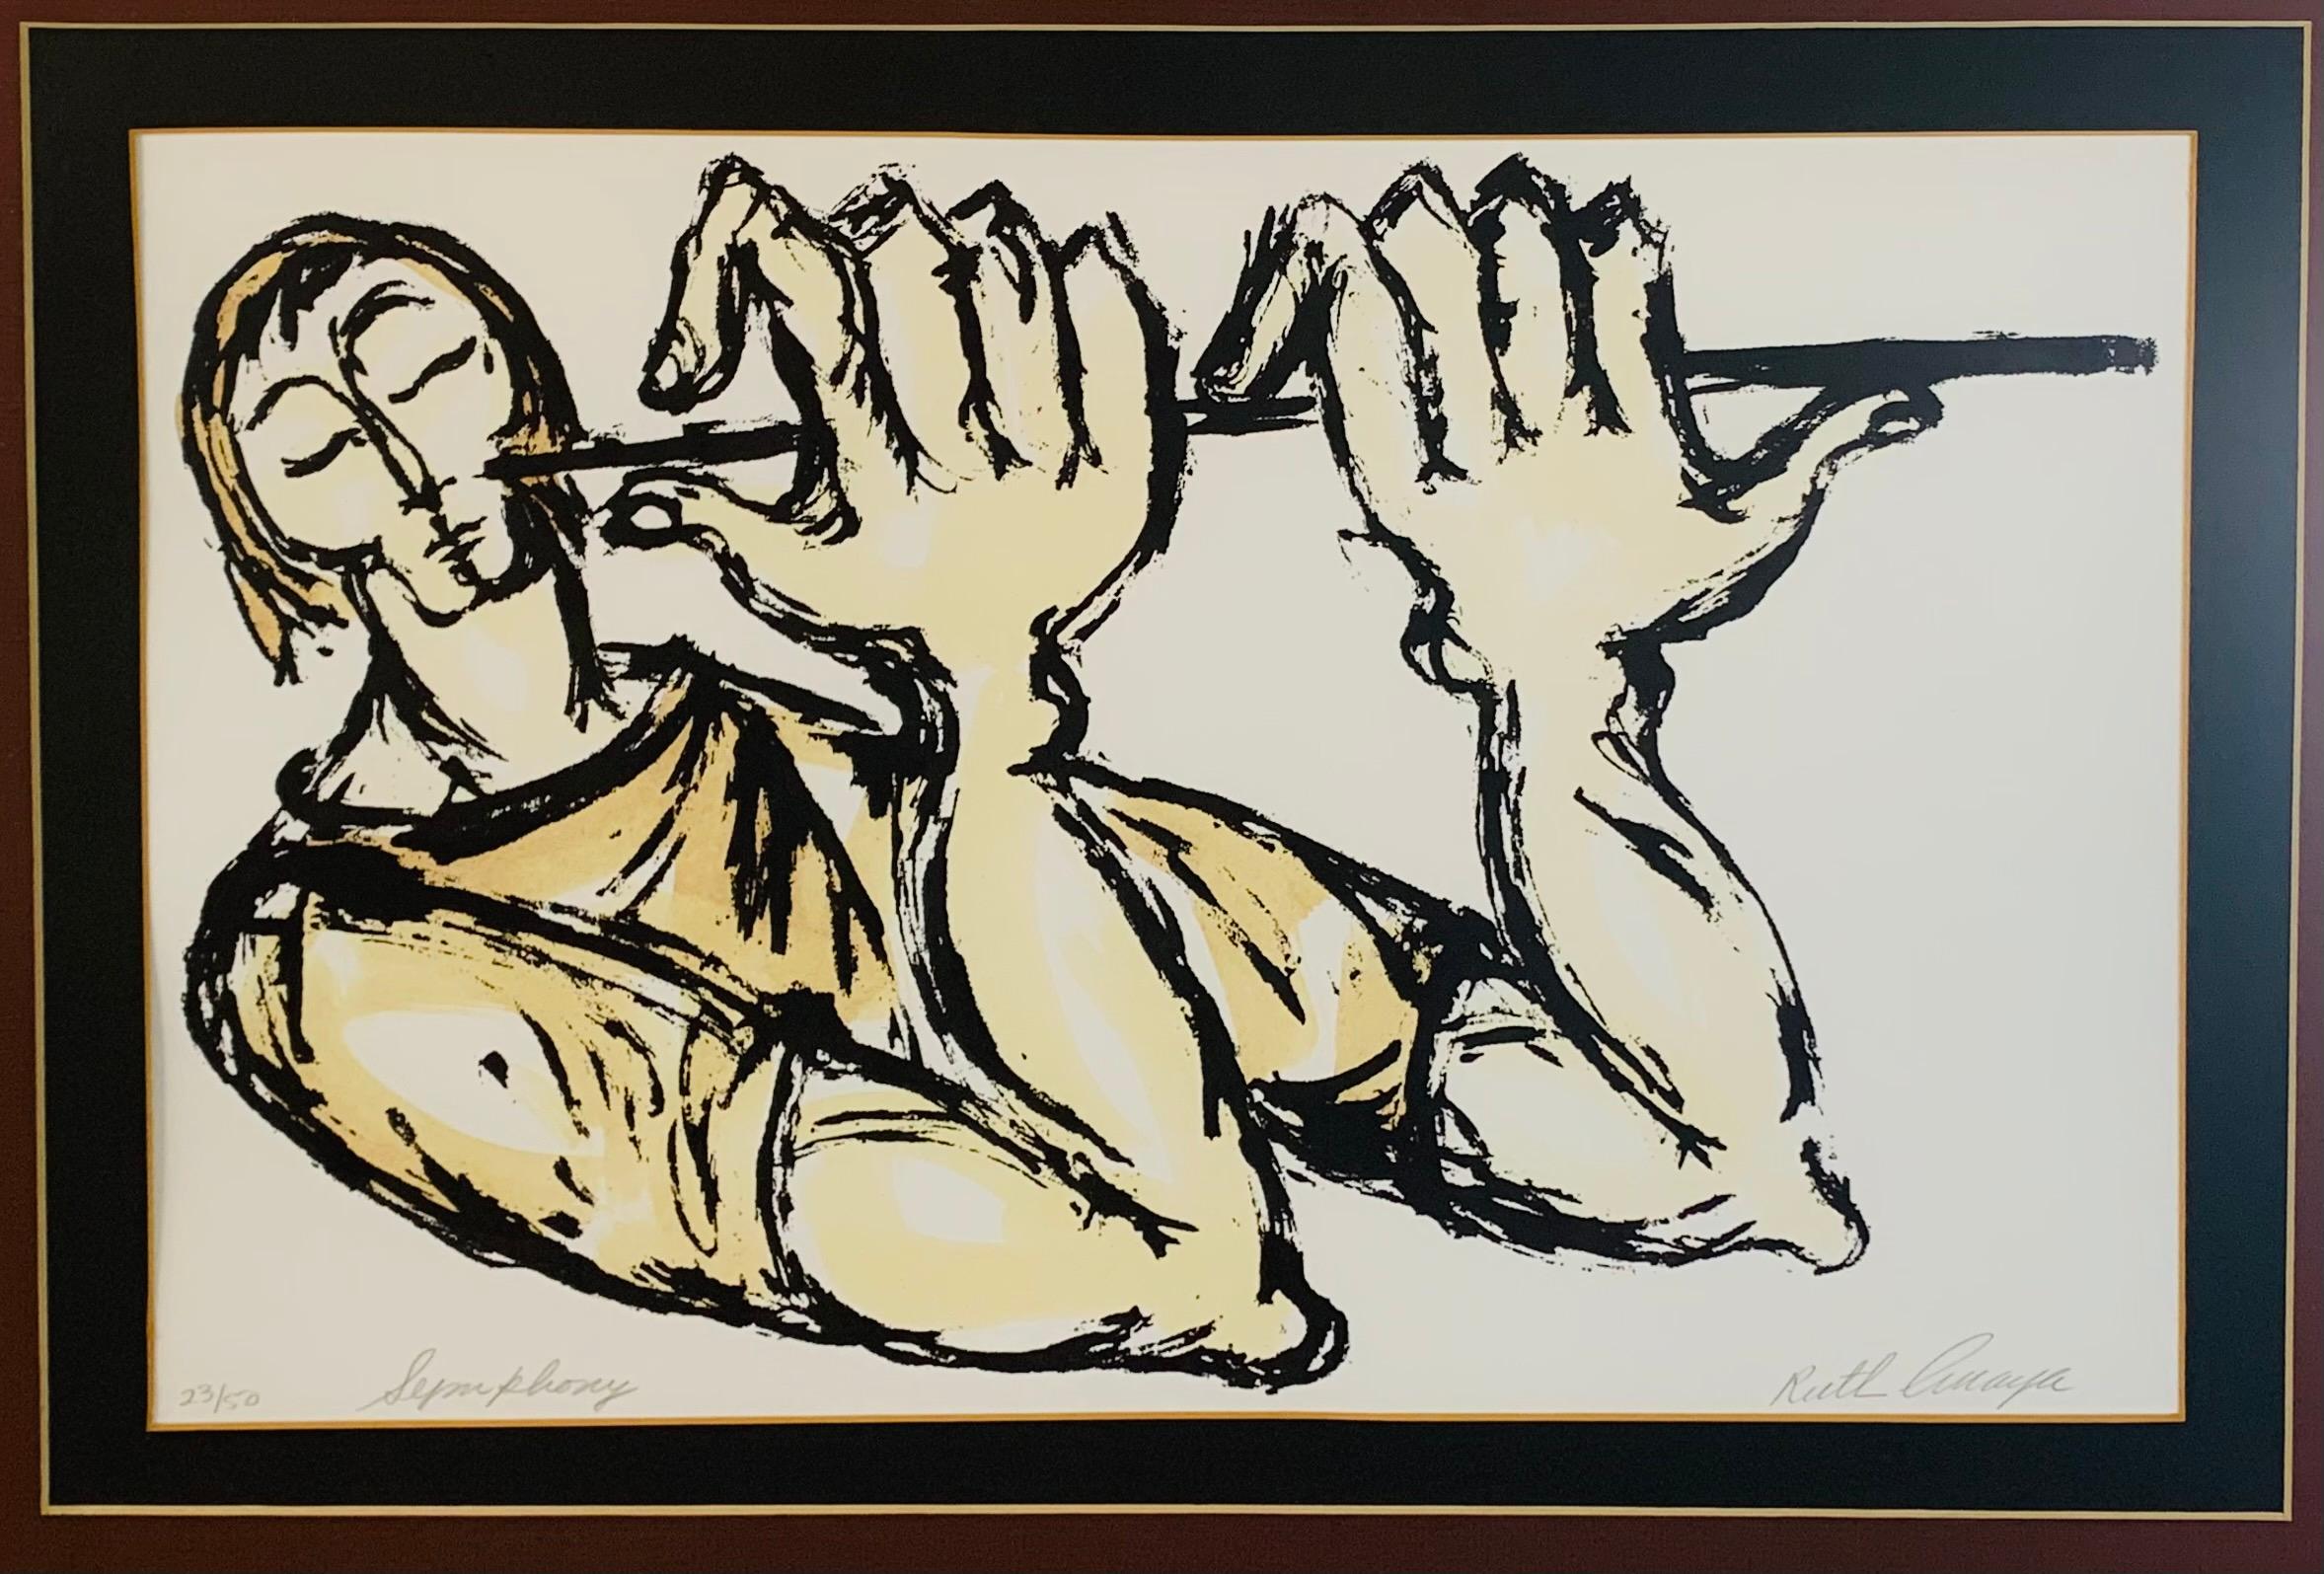 Limited Edition print, symphony, by Ruth Anaya (Canadian, 20th century, figurative expressionist artist). The serigraph print features a flautist in bold black outline with a thin flute and muscular arms. 

Dimensions: 22.25